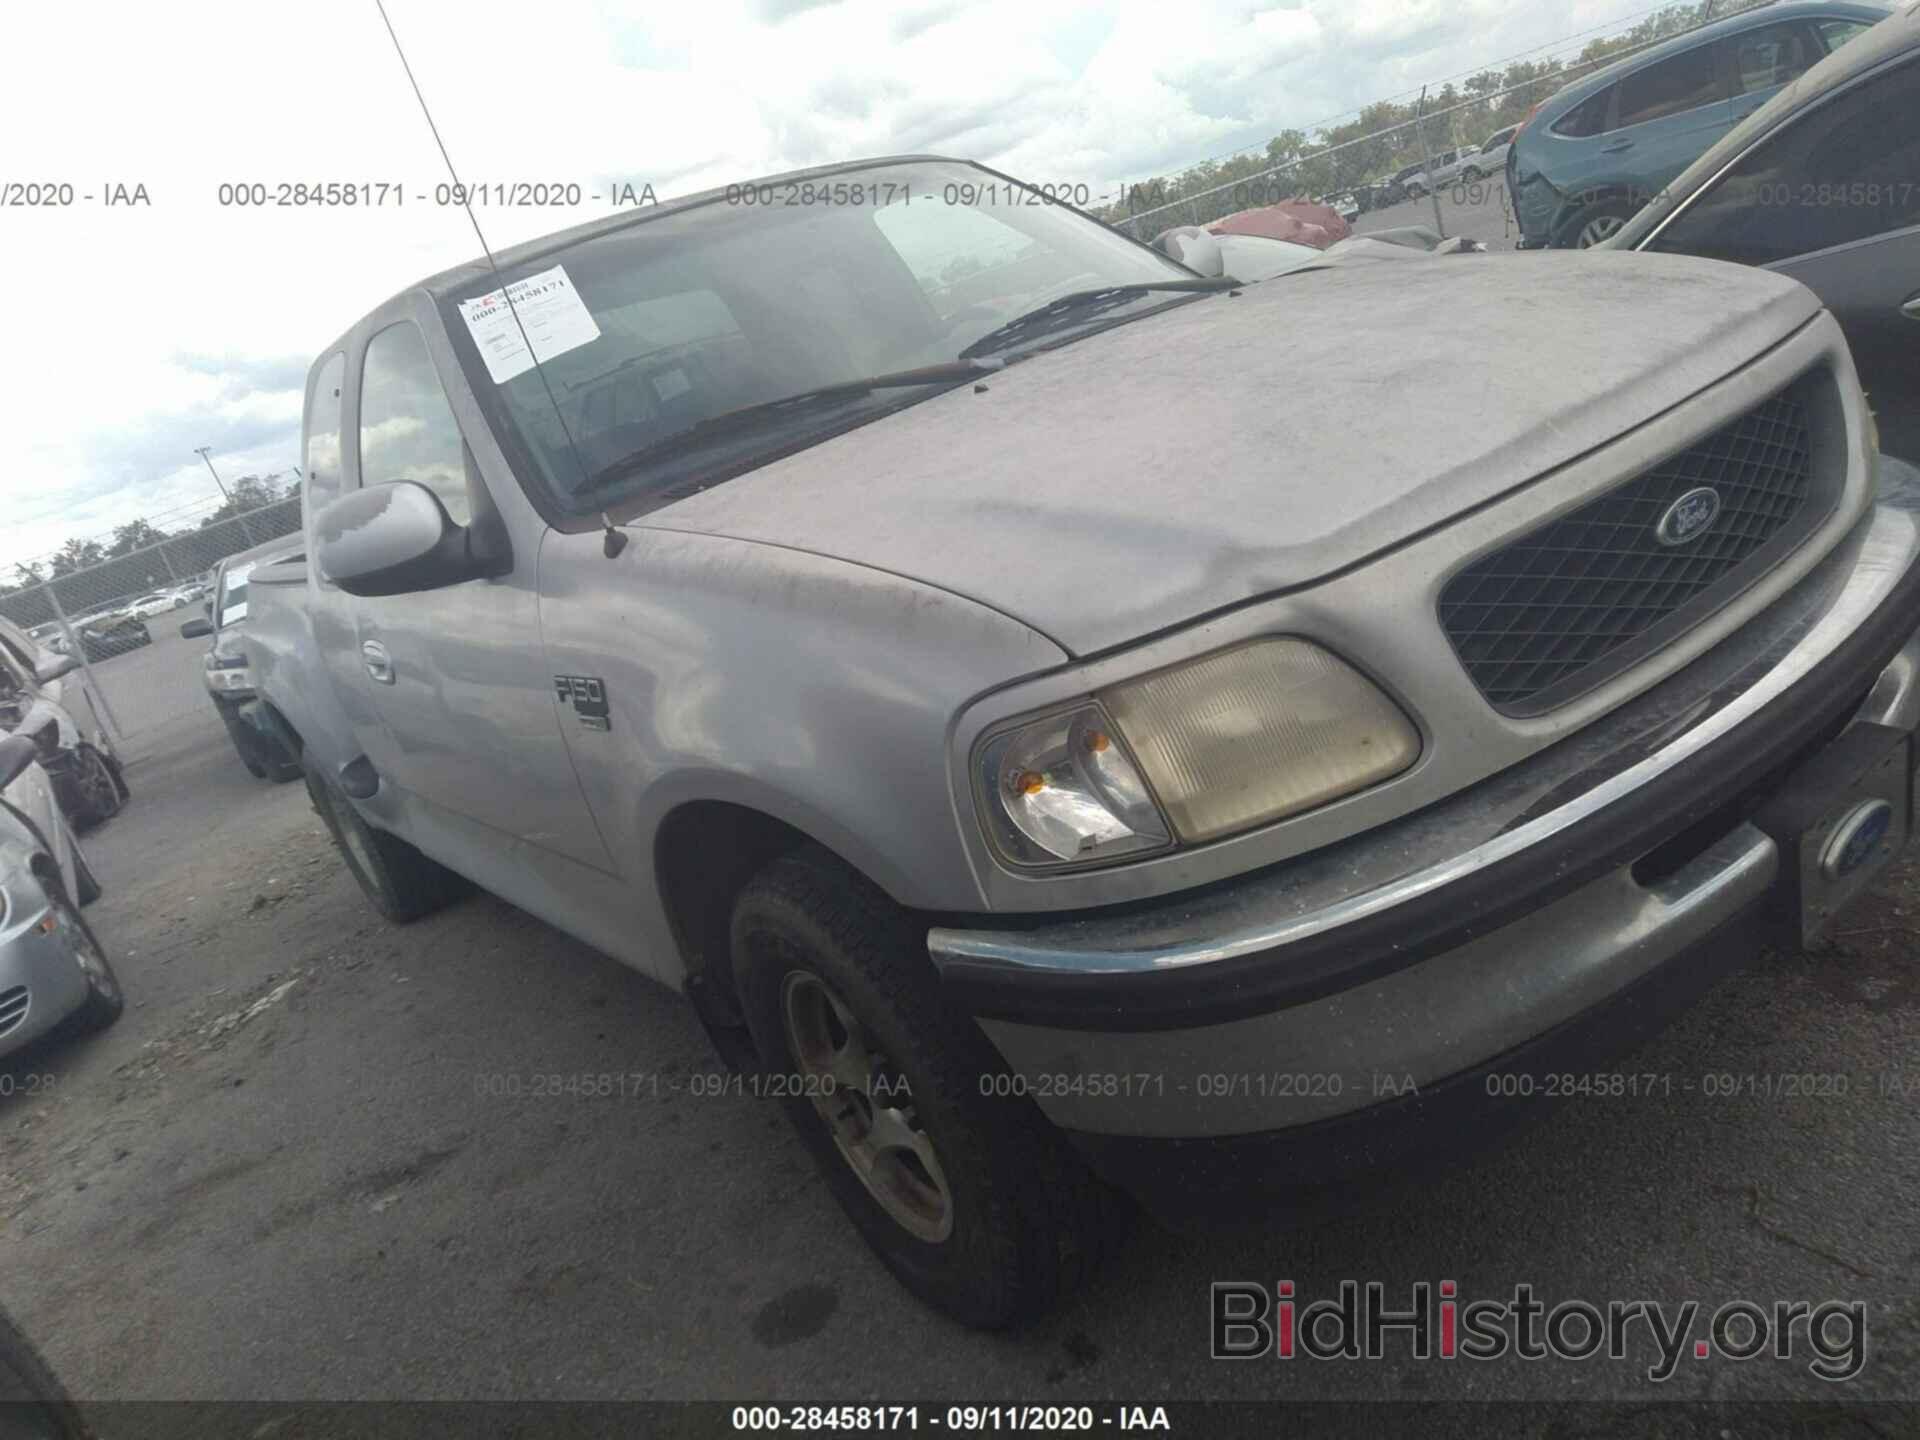 Photo 2FTZX07W8WCA96510 - FORD F-150 1998